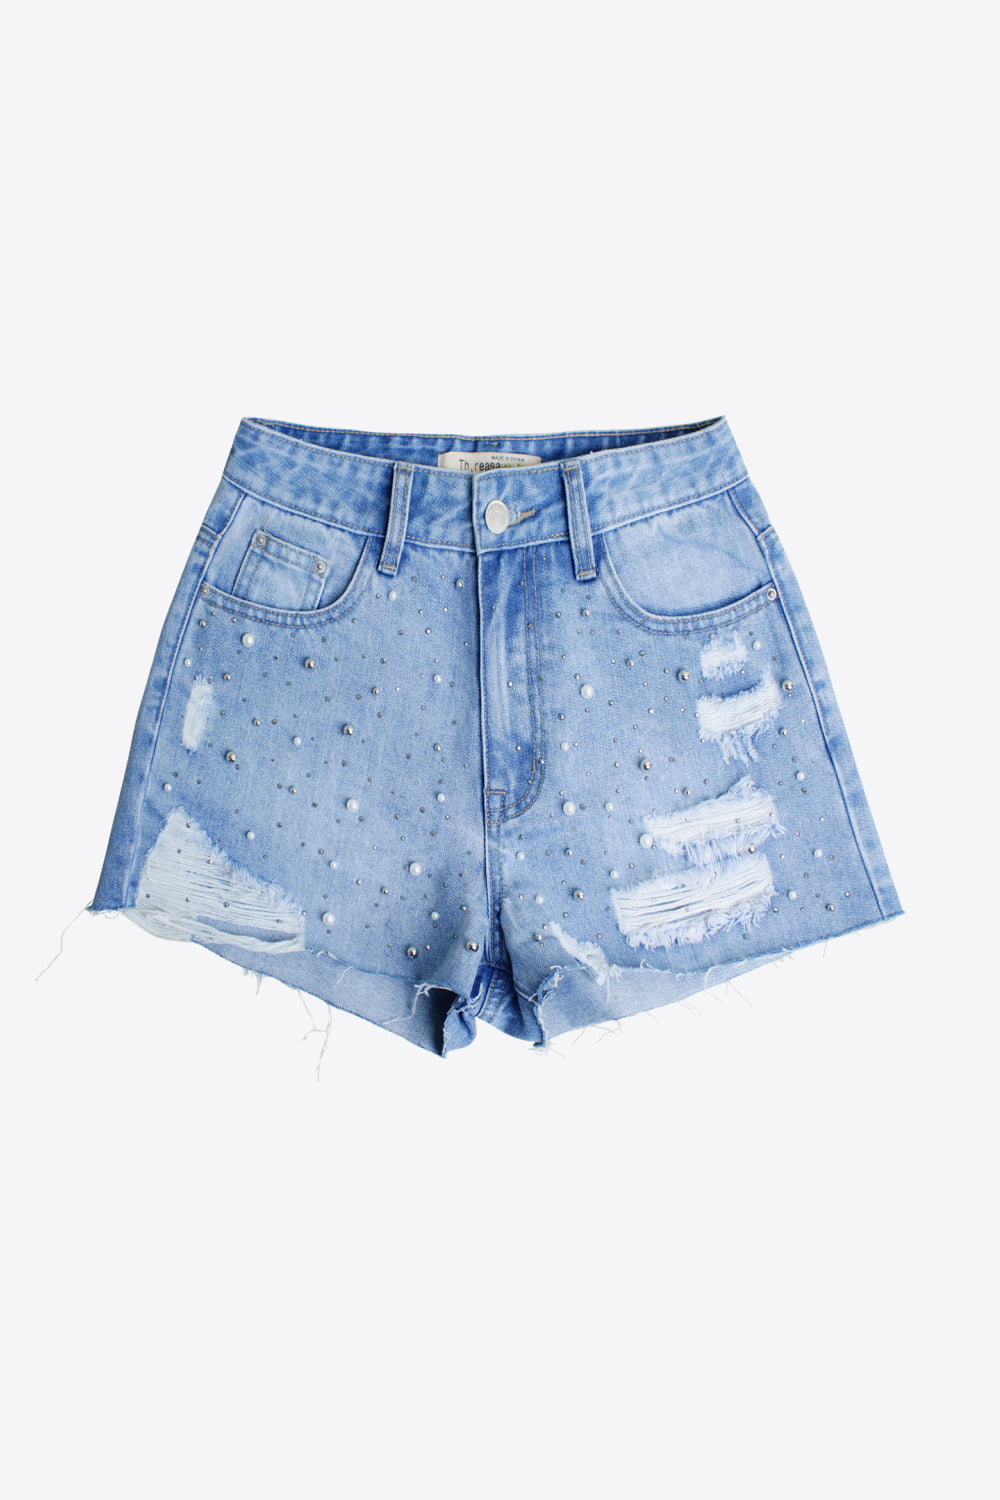 Full Size Distressed Bead Denim Shorts - Light / S - Women’s Clothing & Accessories - Shorts - 1 - 2024